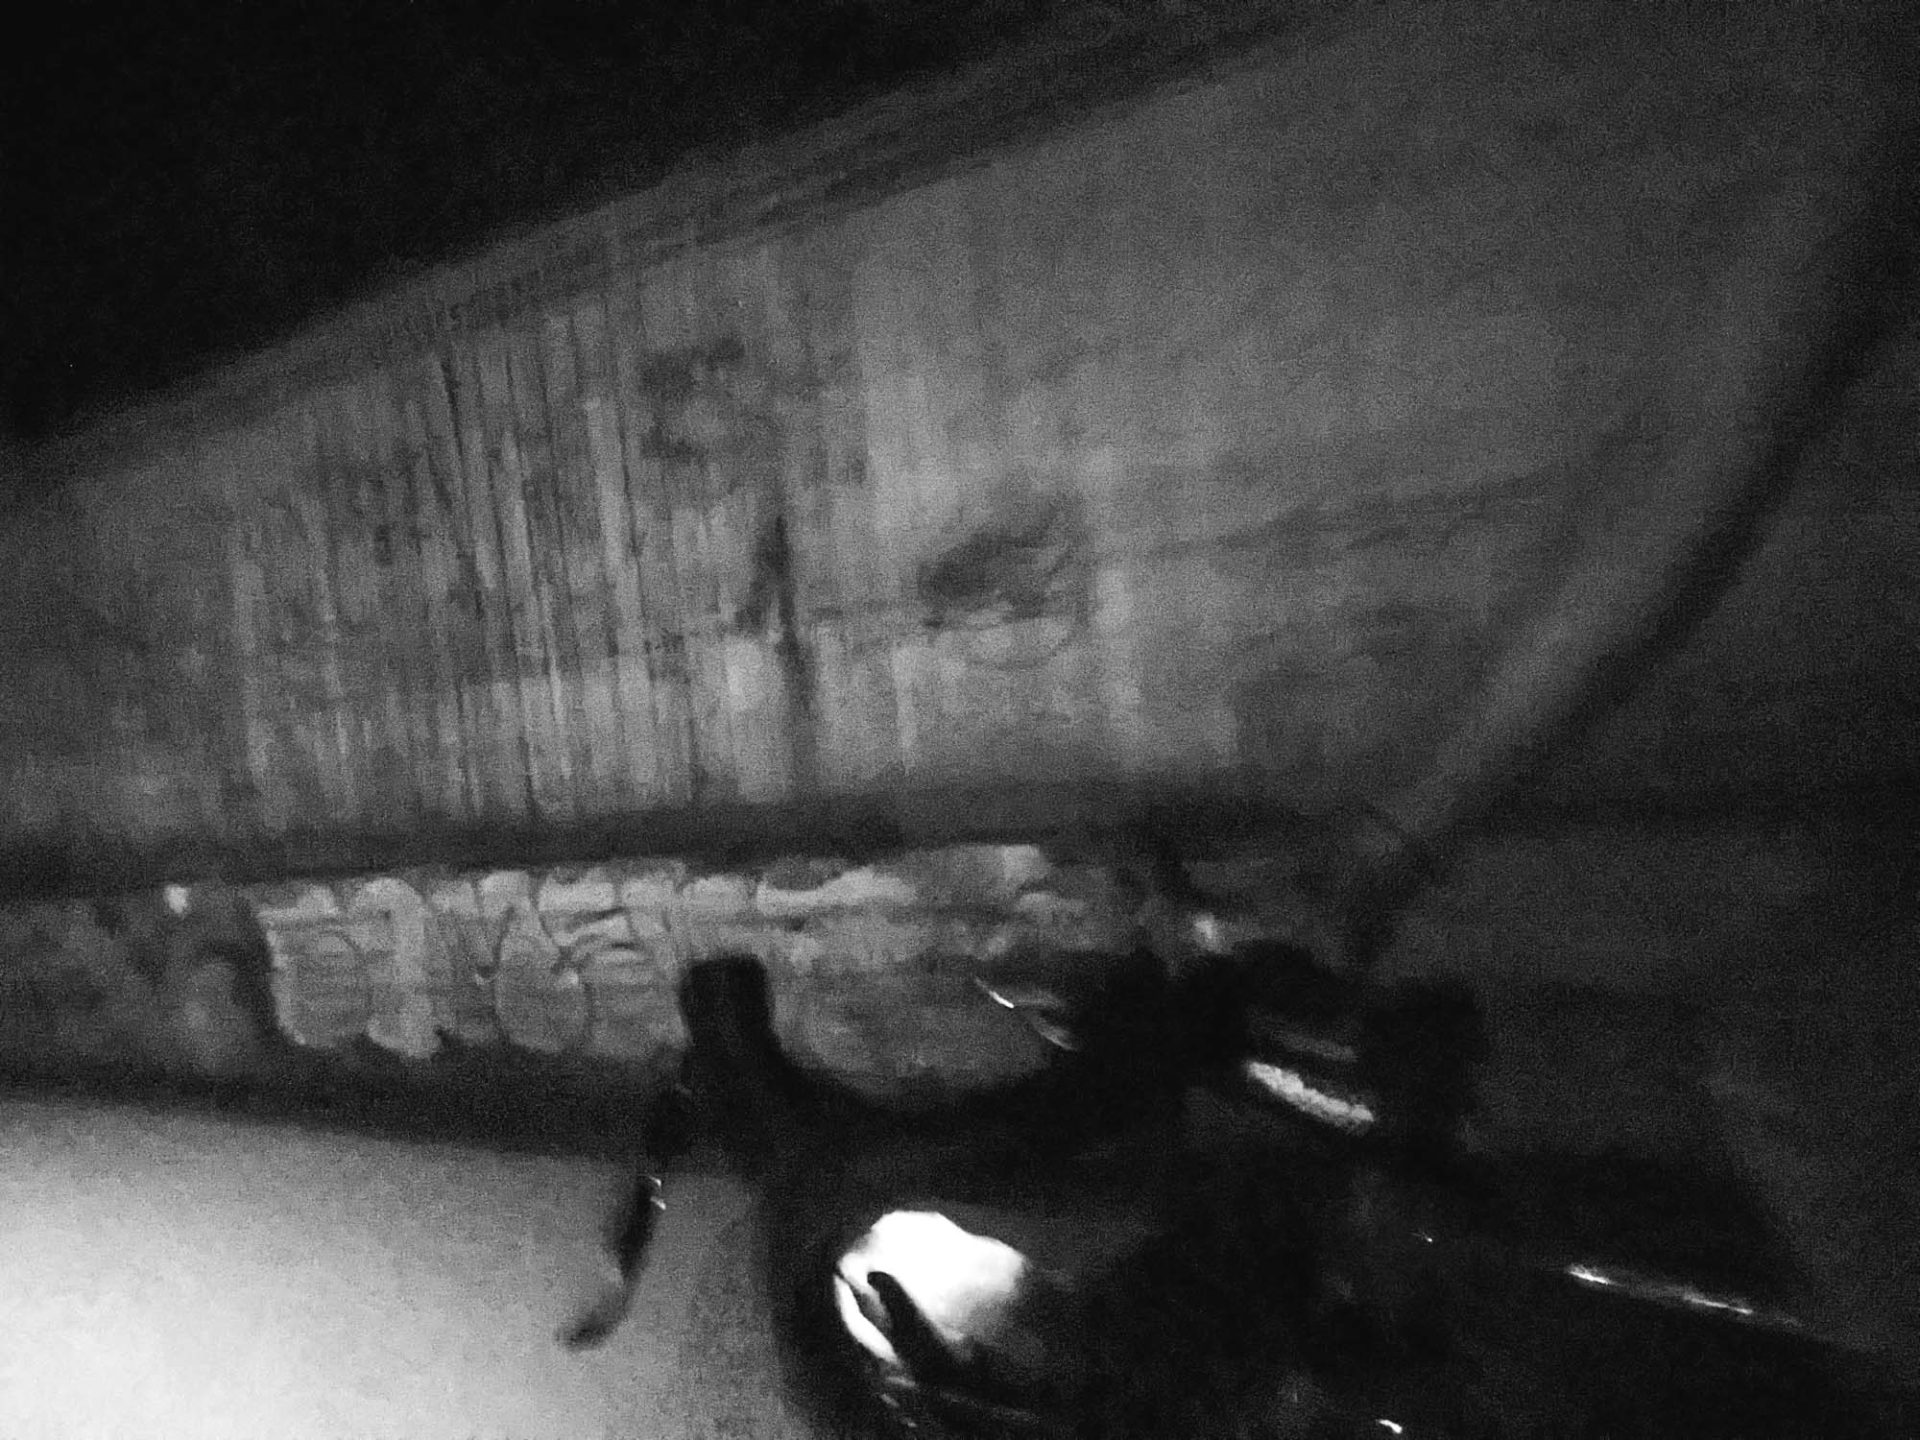 An almost impressionist black and white shot of a rider at night. A ghostly arm reaches down to a handlebar, silhouetted against a concrete wall, slightly blurred from motion.